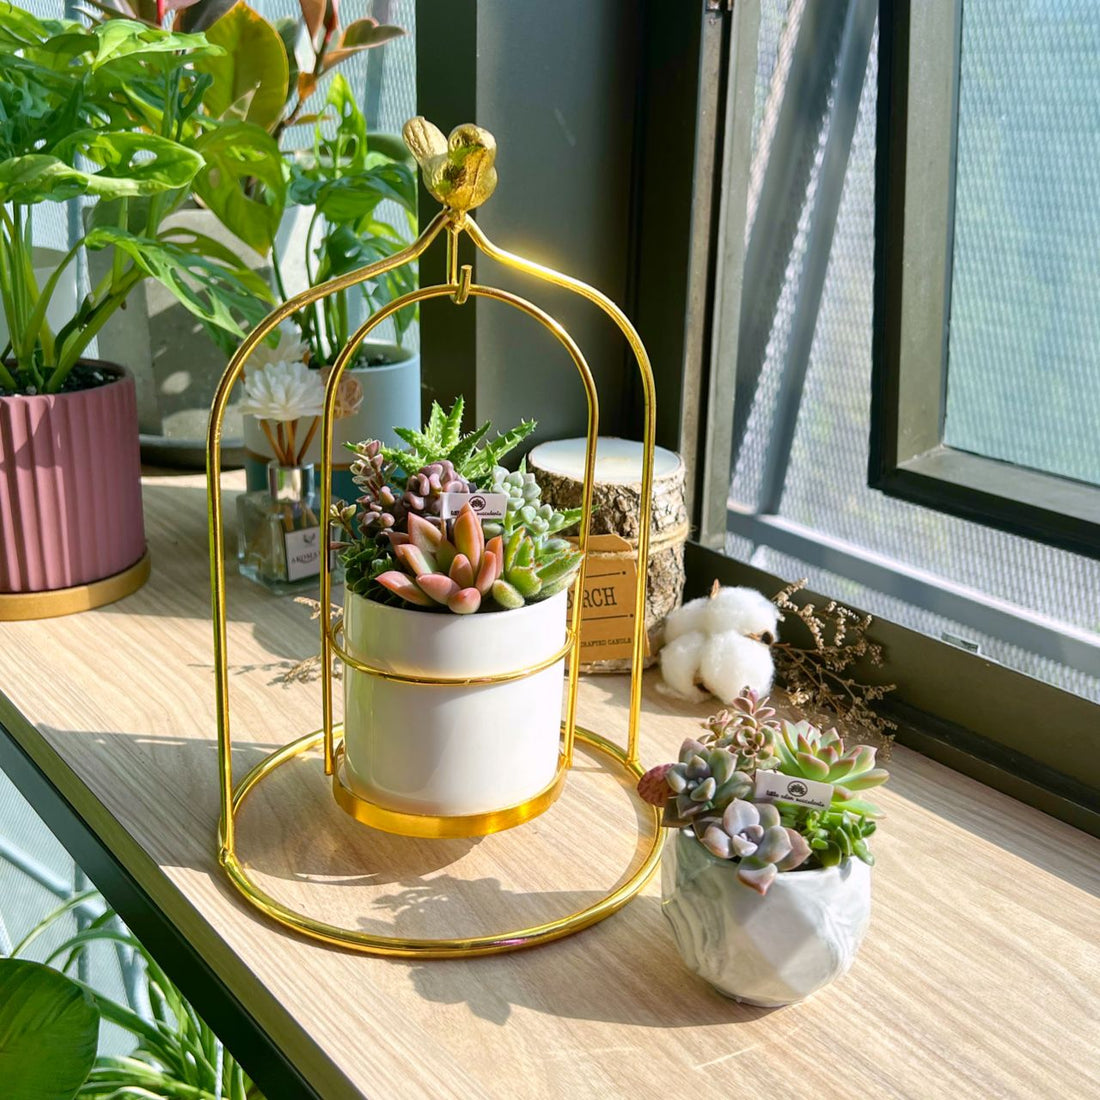 How long can a succulent arrangement stays in the original pot like this?